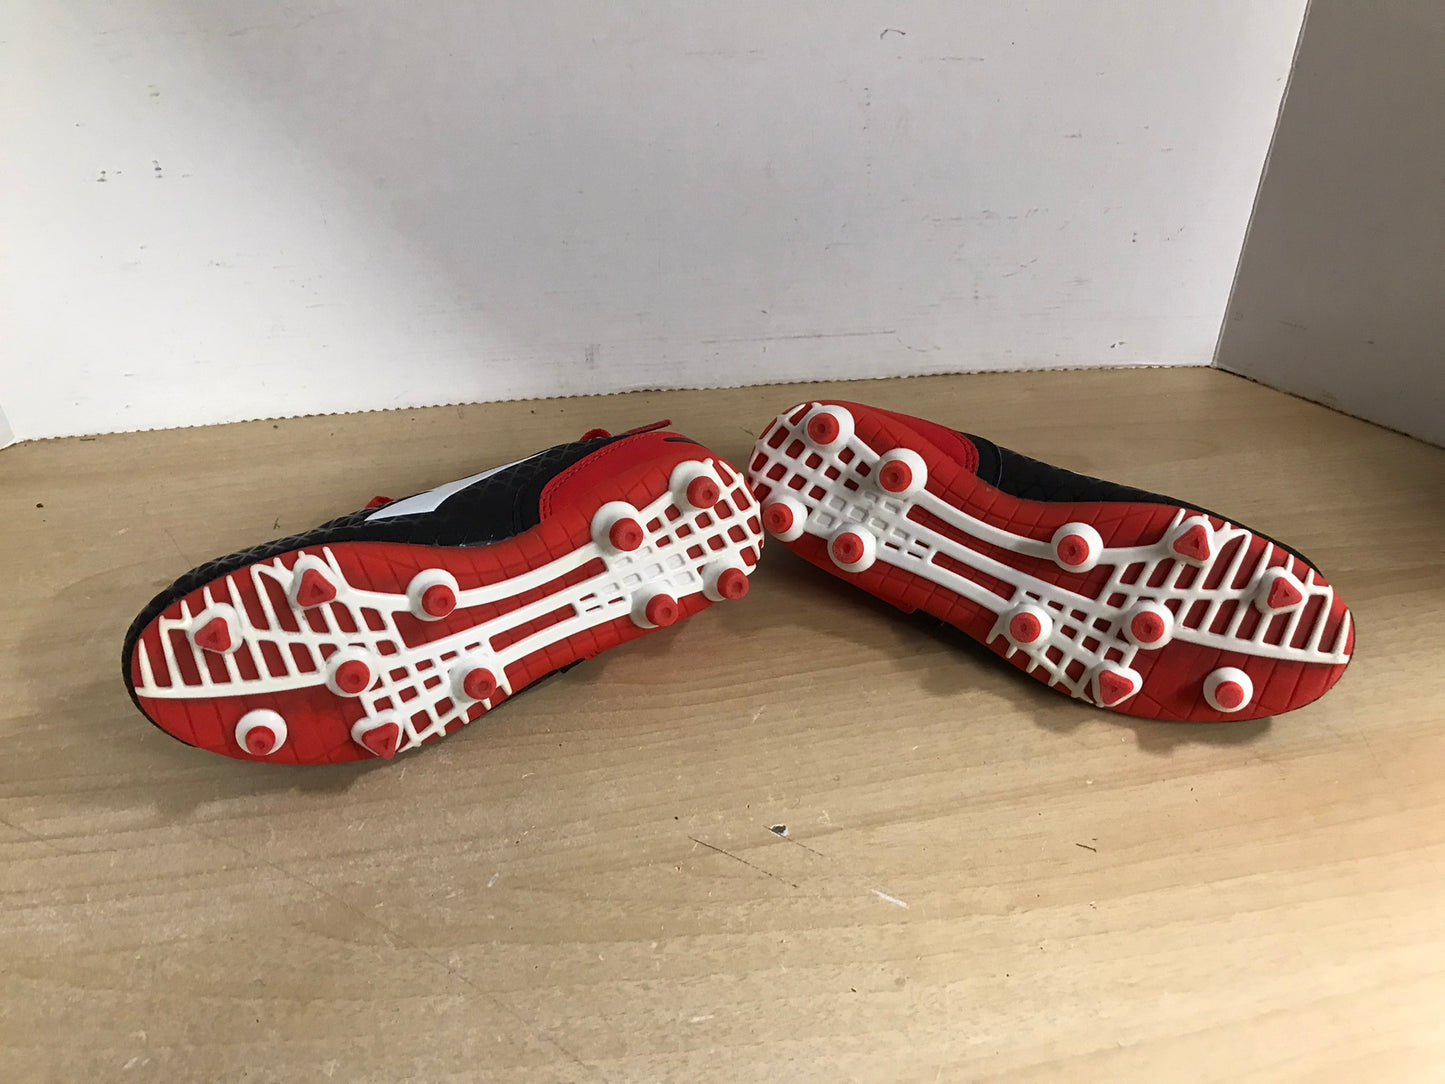 Soccer Shoes Cleats Child Size 3 Adidas Black White Red Excellent New Demo Model